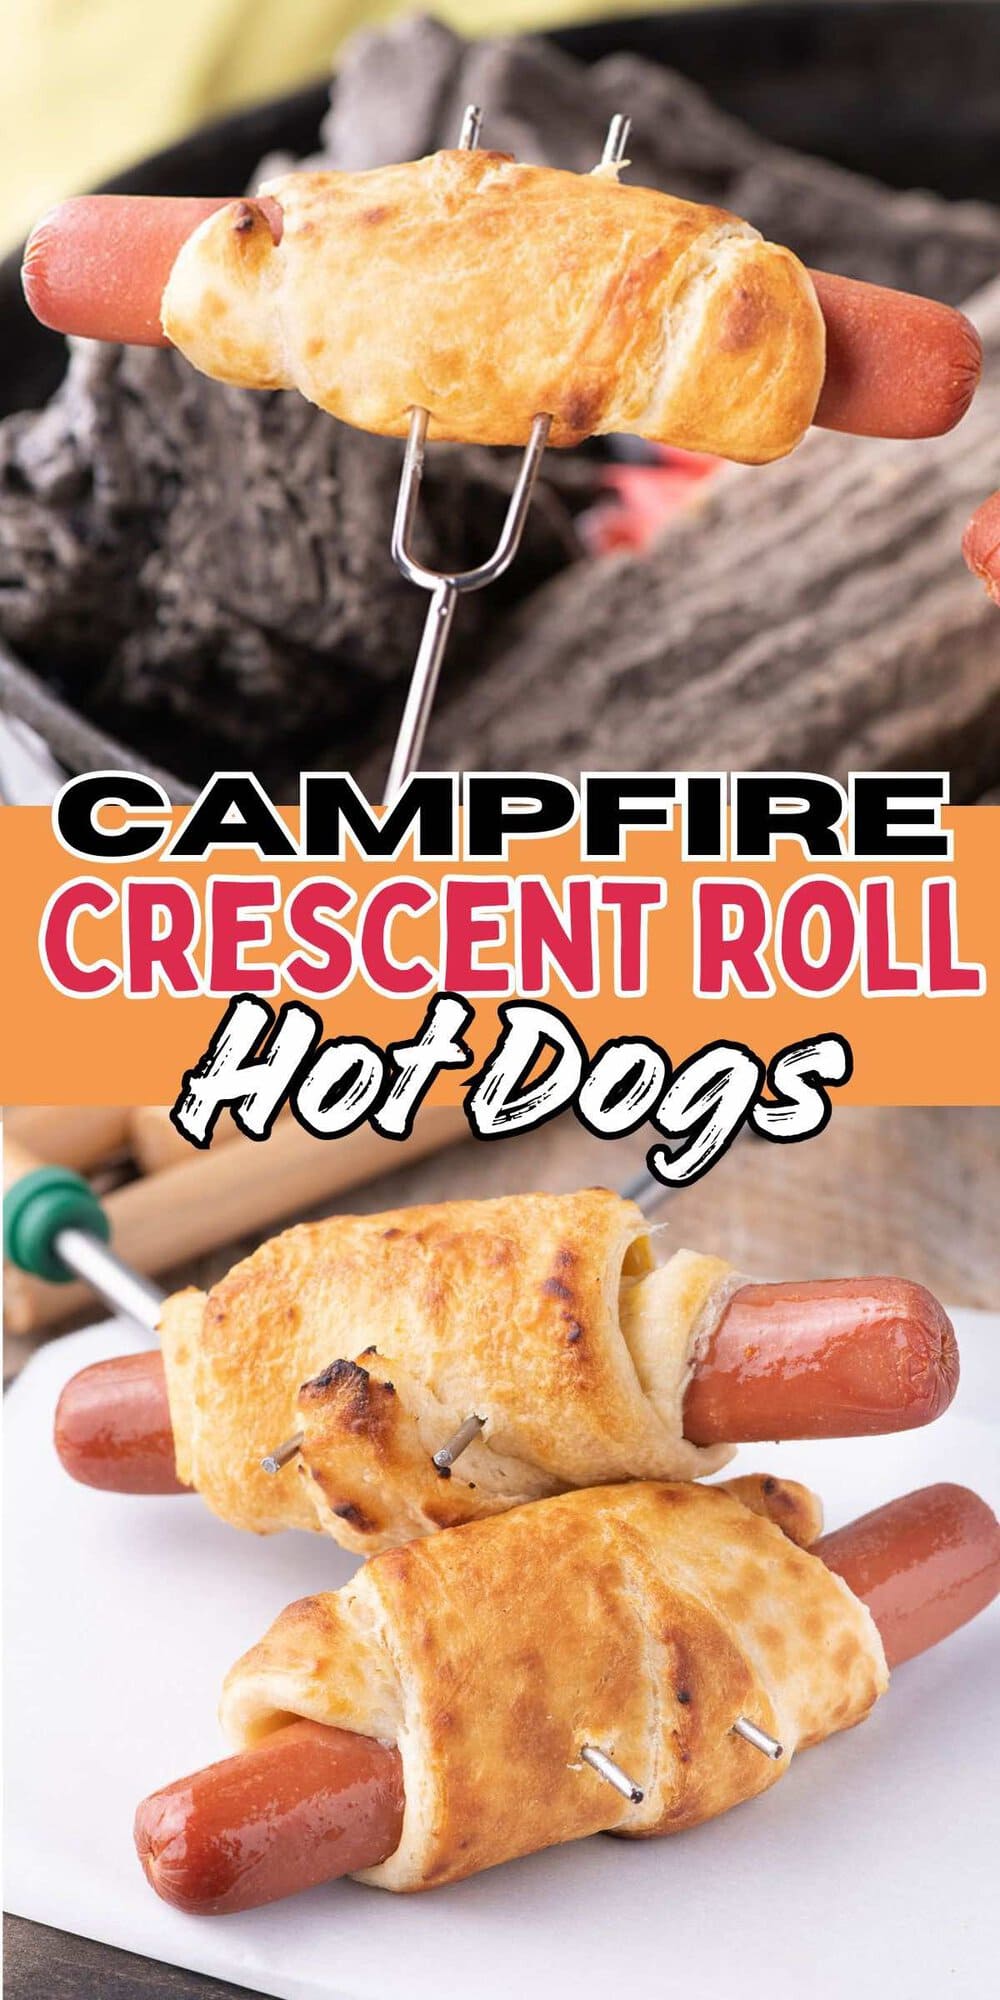 Campfire Crescent Roll Hot Dogs pins.